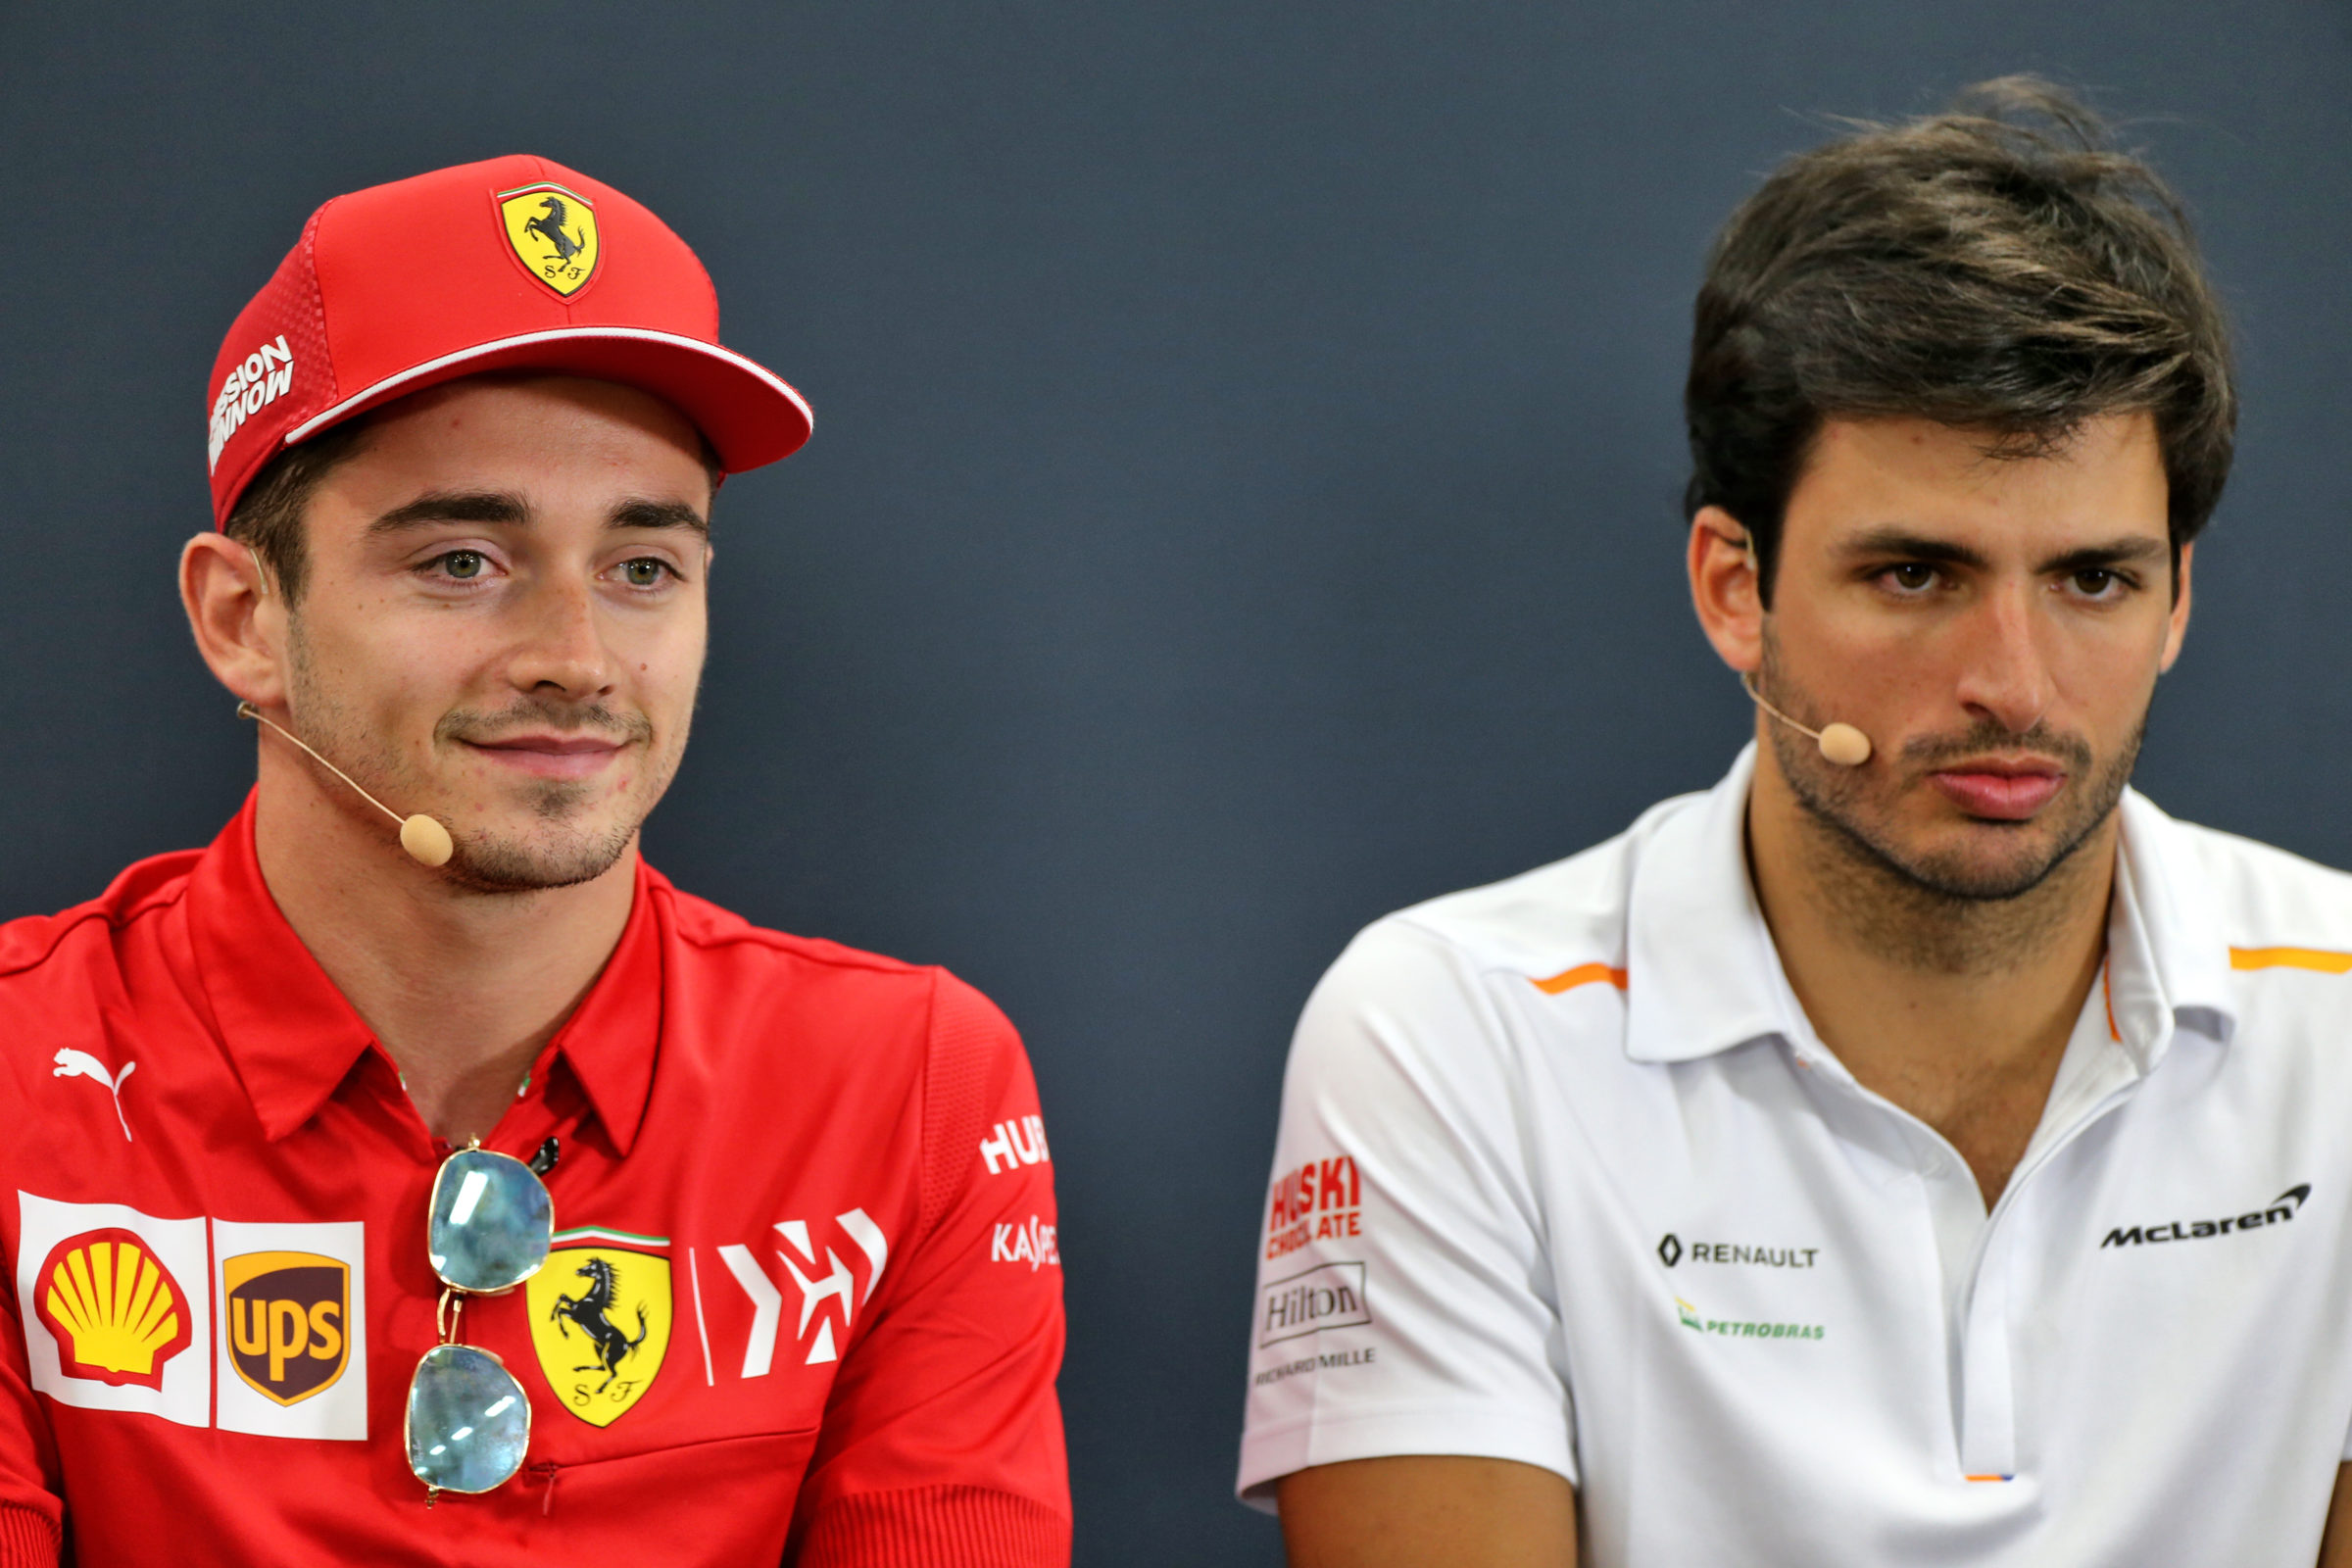 Leclerc and Sainz to test with Ferrari next week at Fiorano